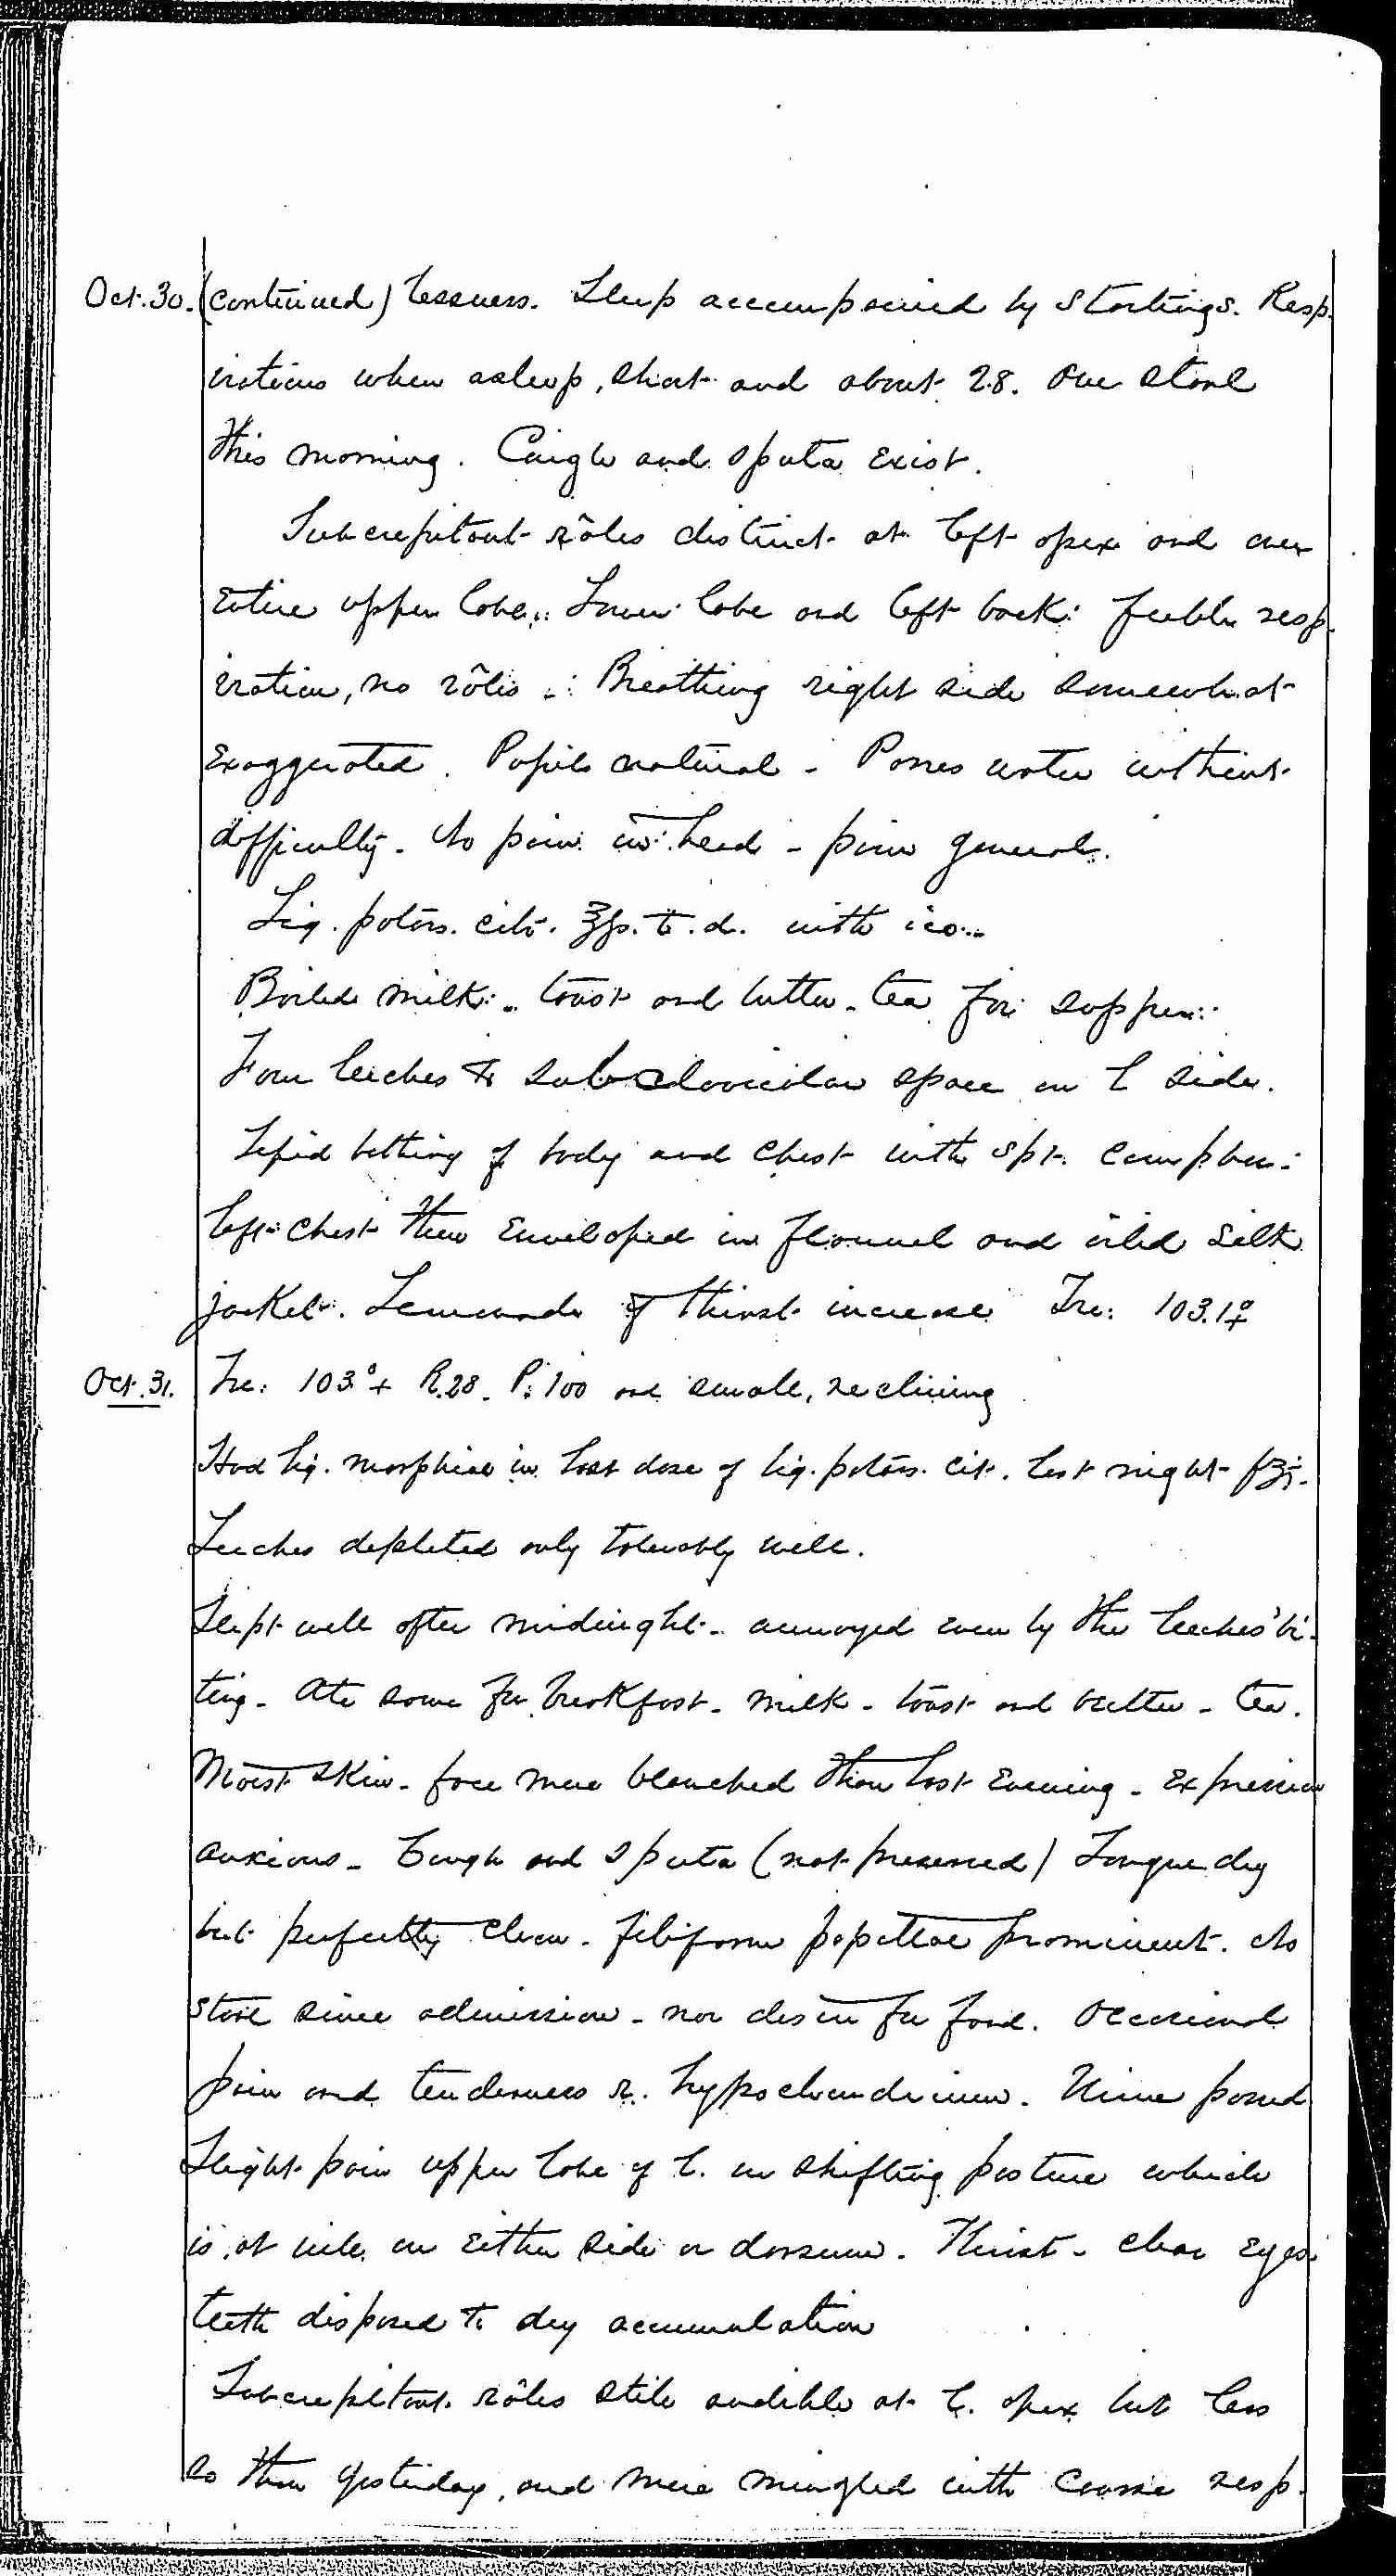 Entry for Richard Forn (page 2 of 21) in the log Hospital Tickets and Case Papers - Naval Hospital - Washington, D.C. - 1868-69